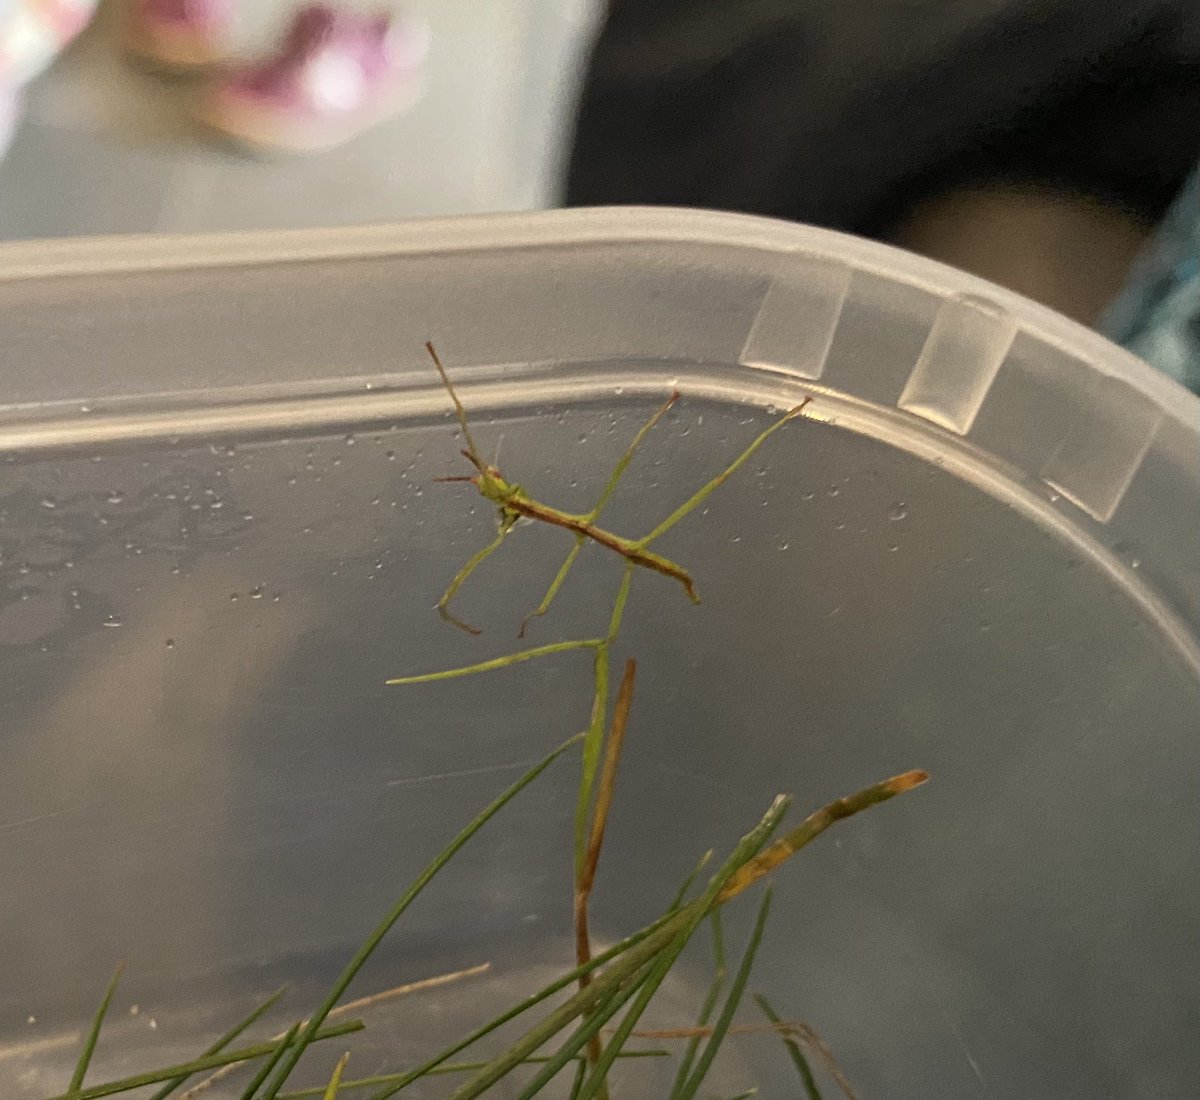 We found a stick insect in our car yesterday. In Cornwall!! Apparently 3 non-native species have become established here. But can an #entomologist tell us what species this juvenile is please?